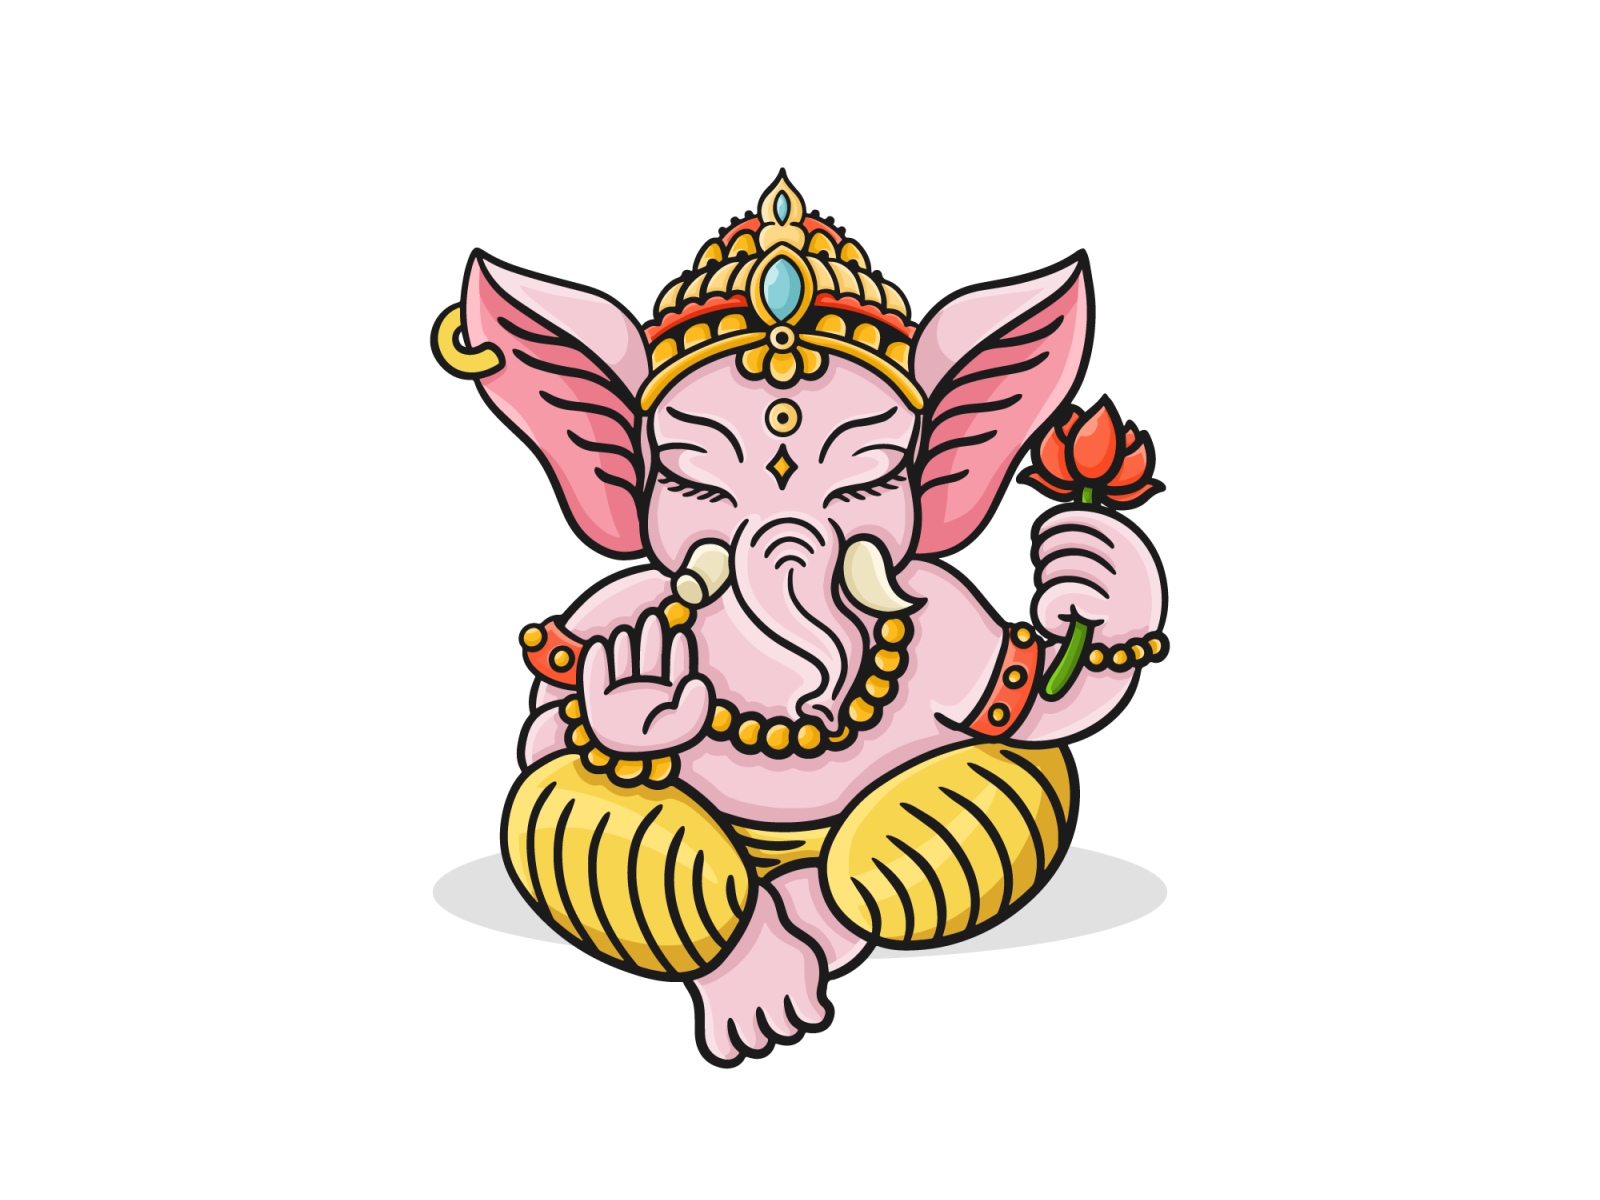 Lord ganesh festival card in shiny red color Vector Image